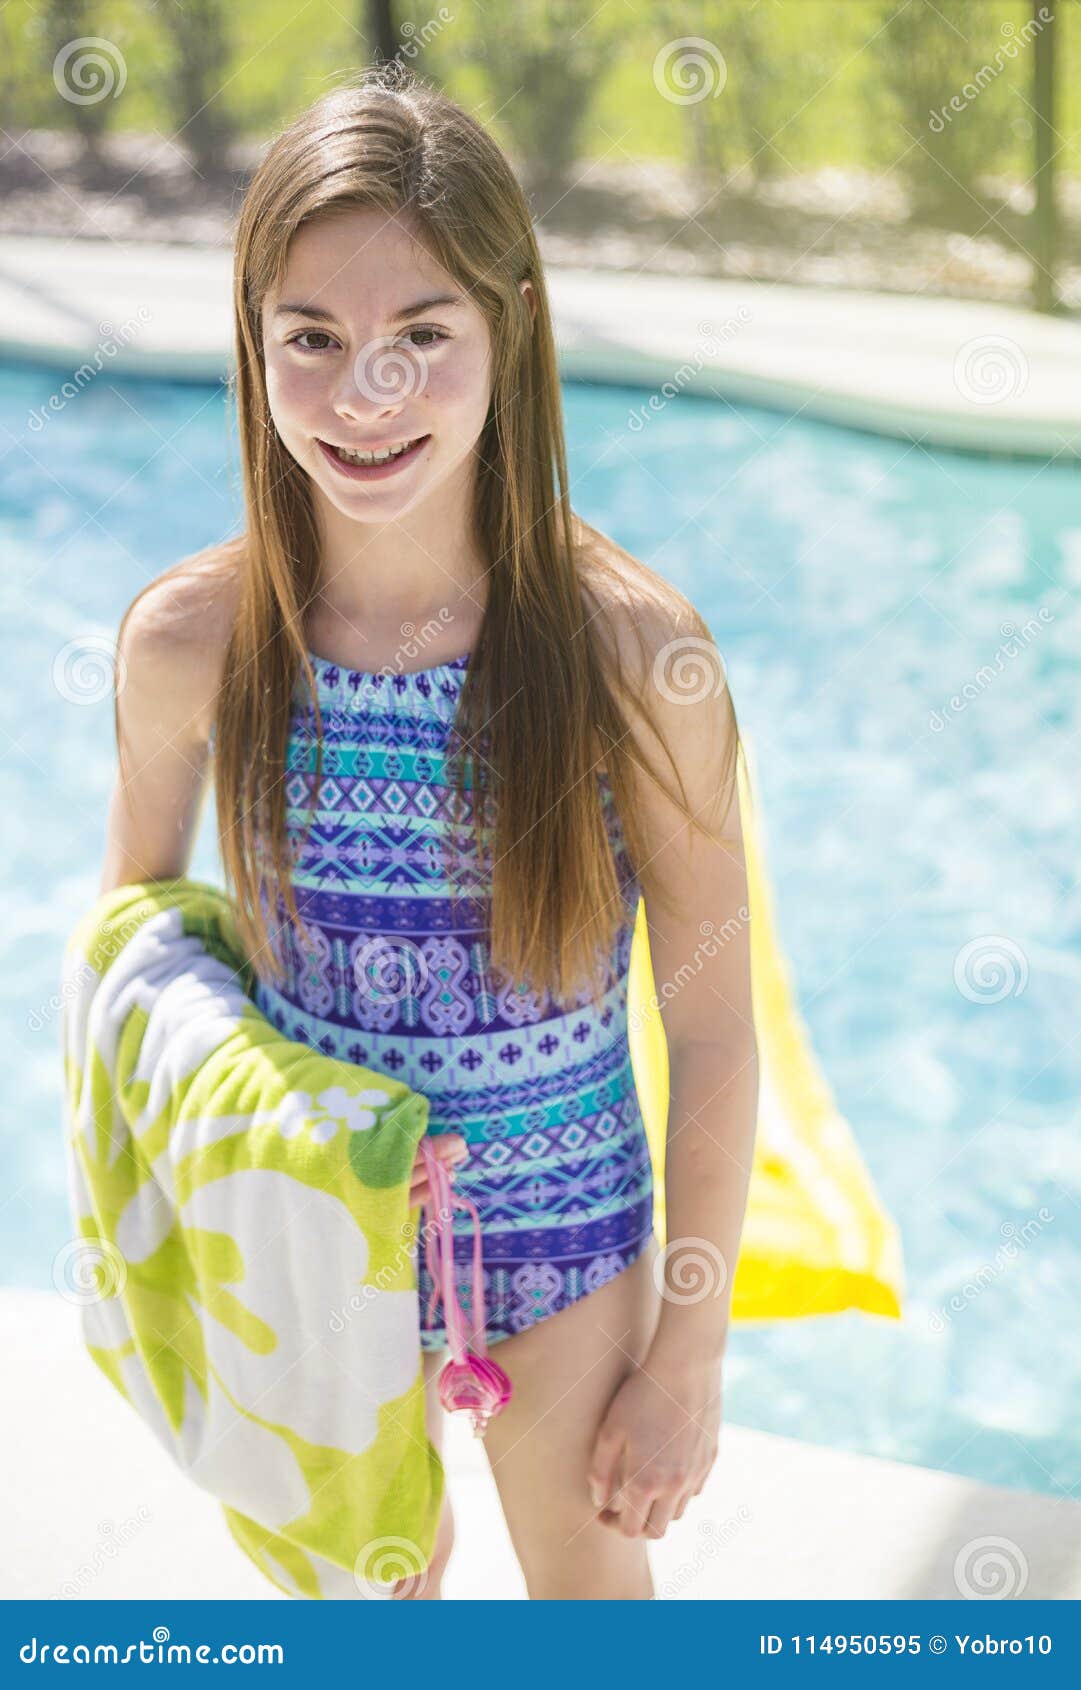 Teenage Girl Going Swimming in an Outdoor Pool during Summer Vaction ...